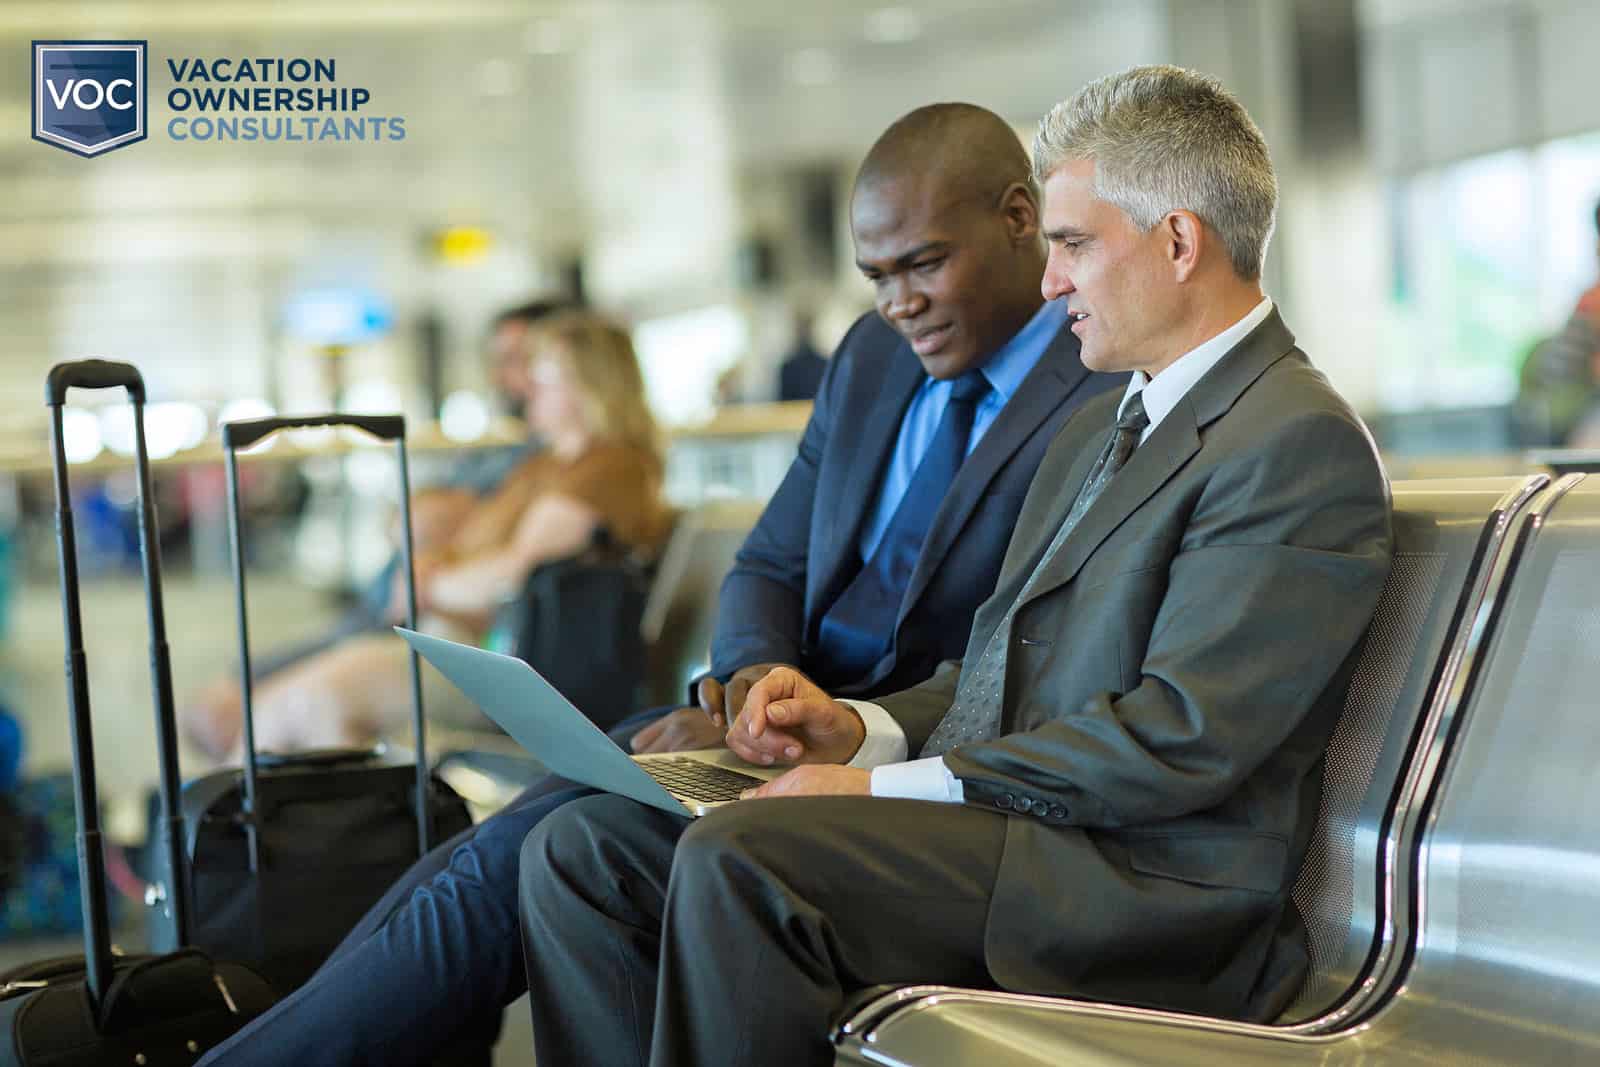 two-men-looking-at-timeshare-contract-and-discussing-travel-club-membership-at-airport-while-waiting-for-flight